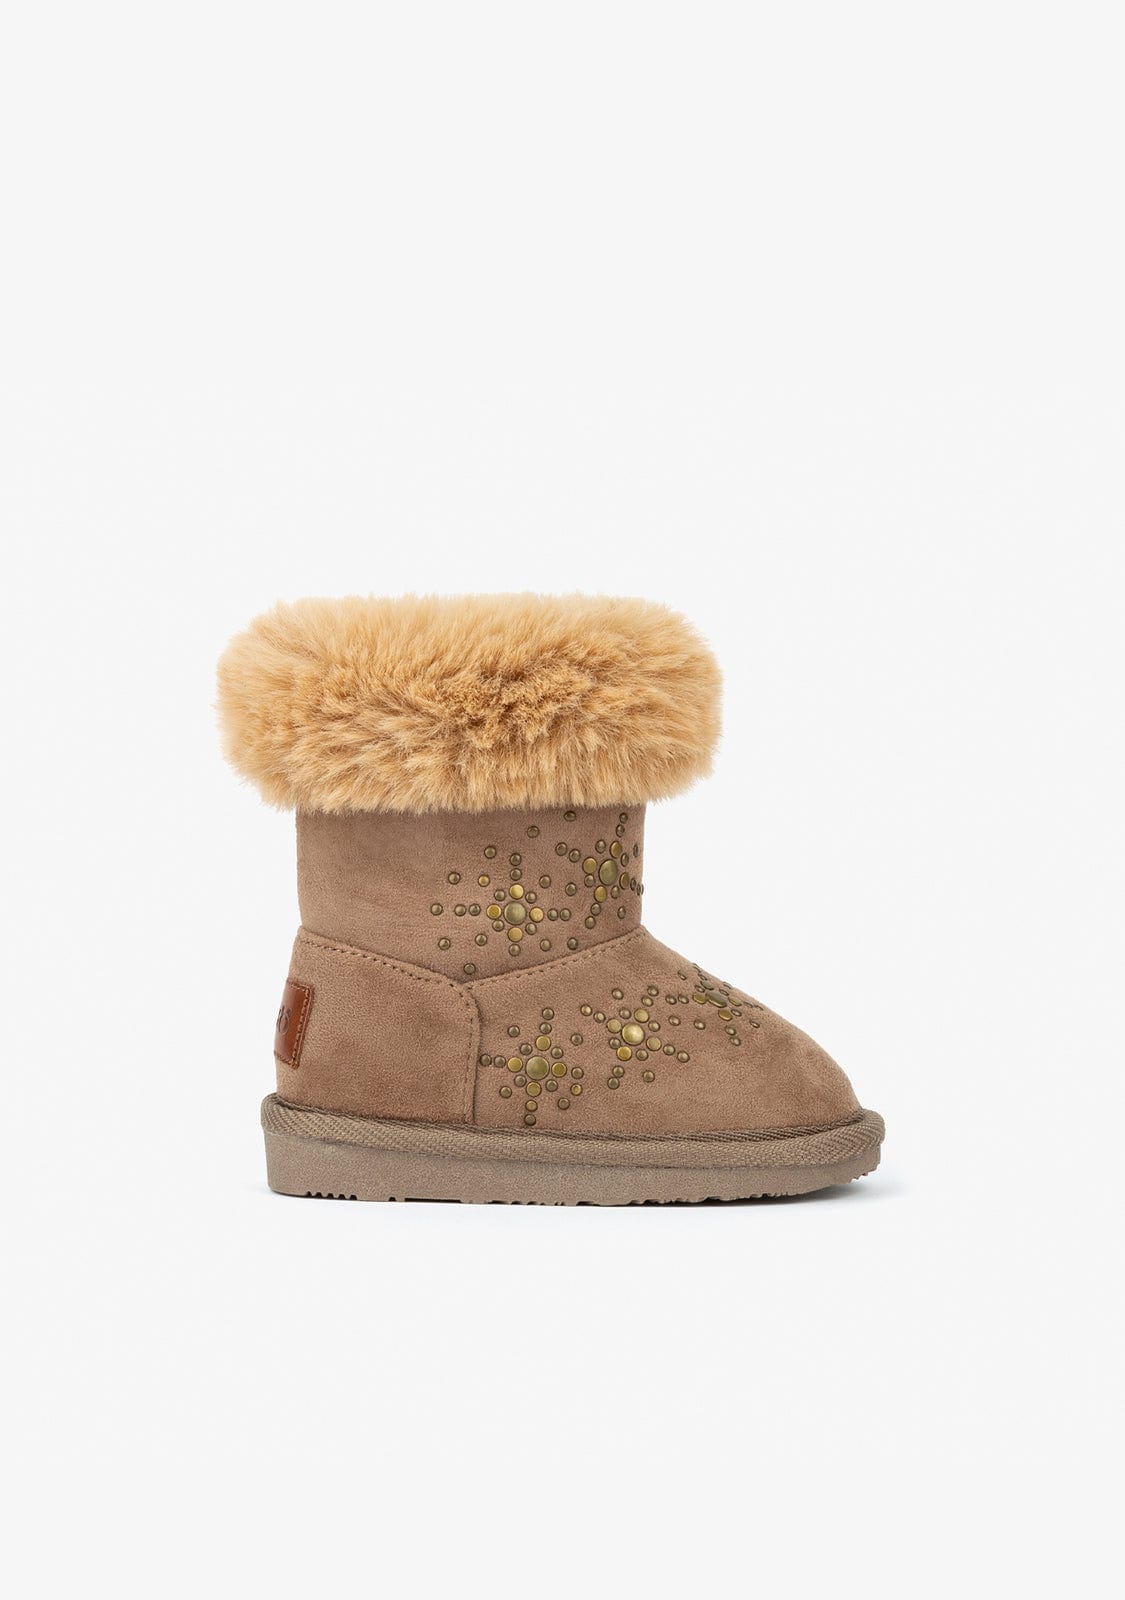 OSITO Shoes Baby's Taupe Snow Australian Boots